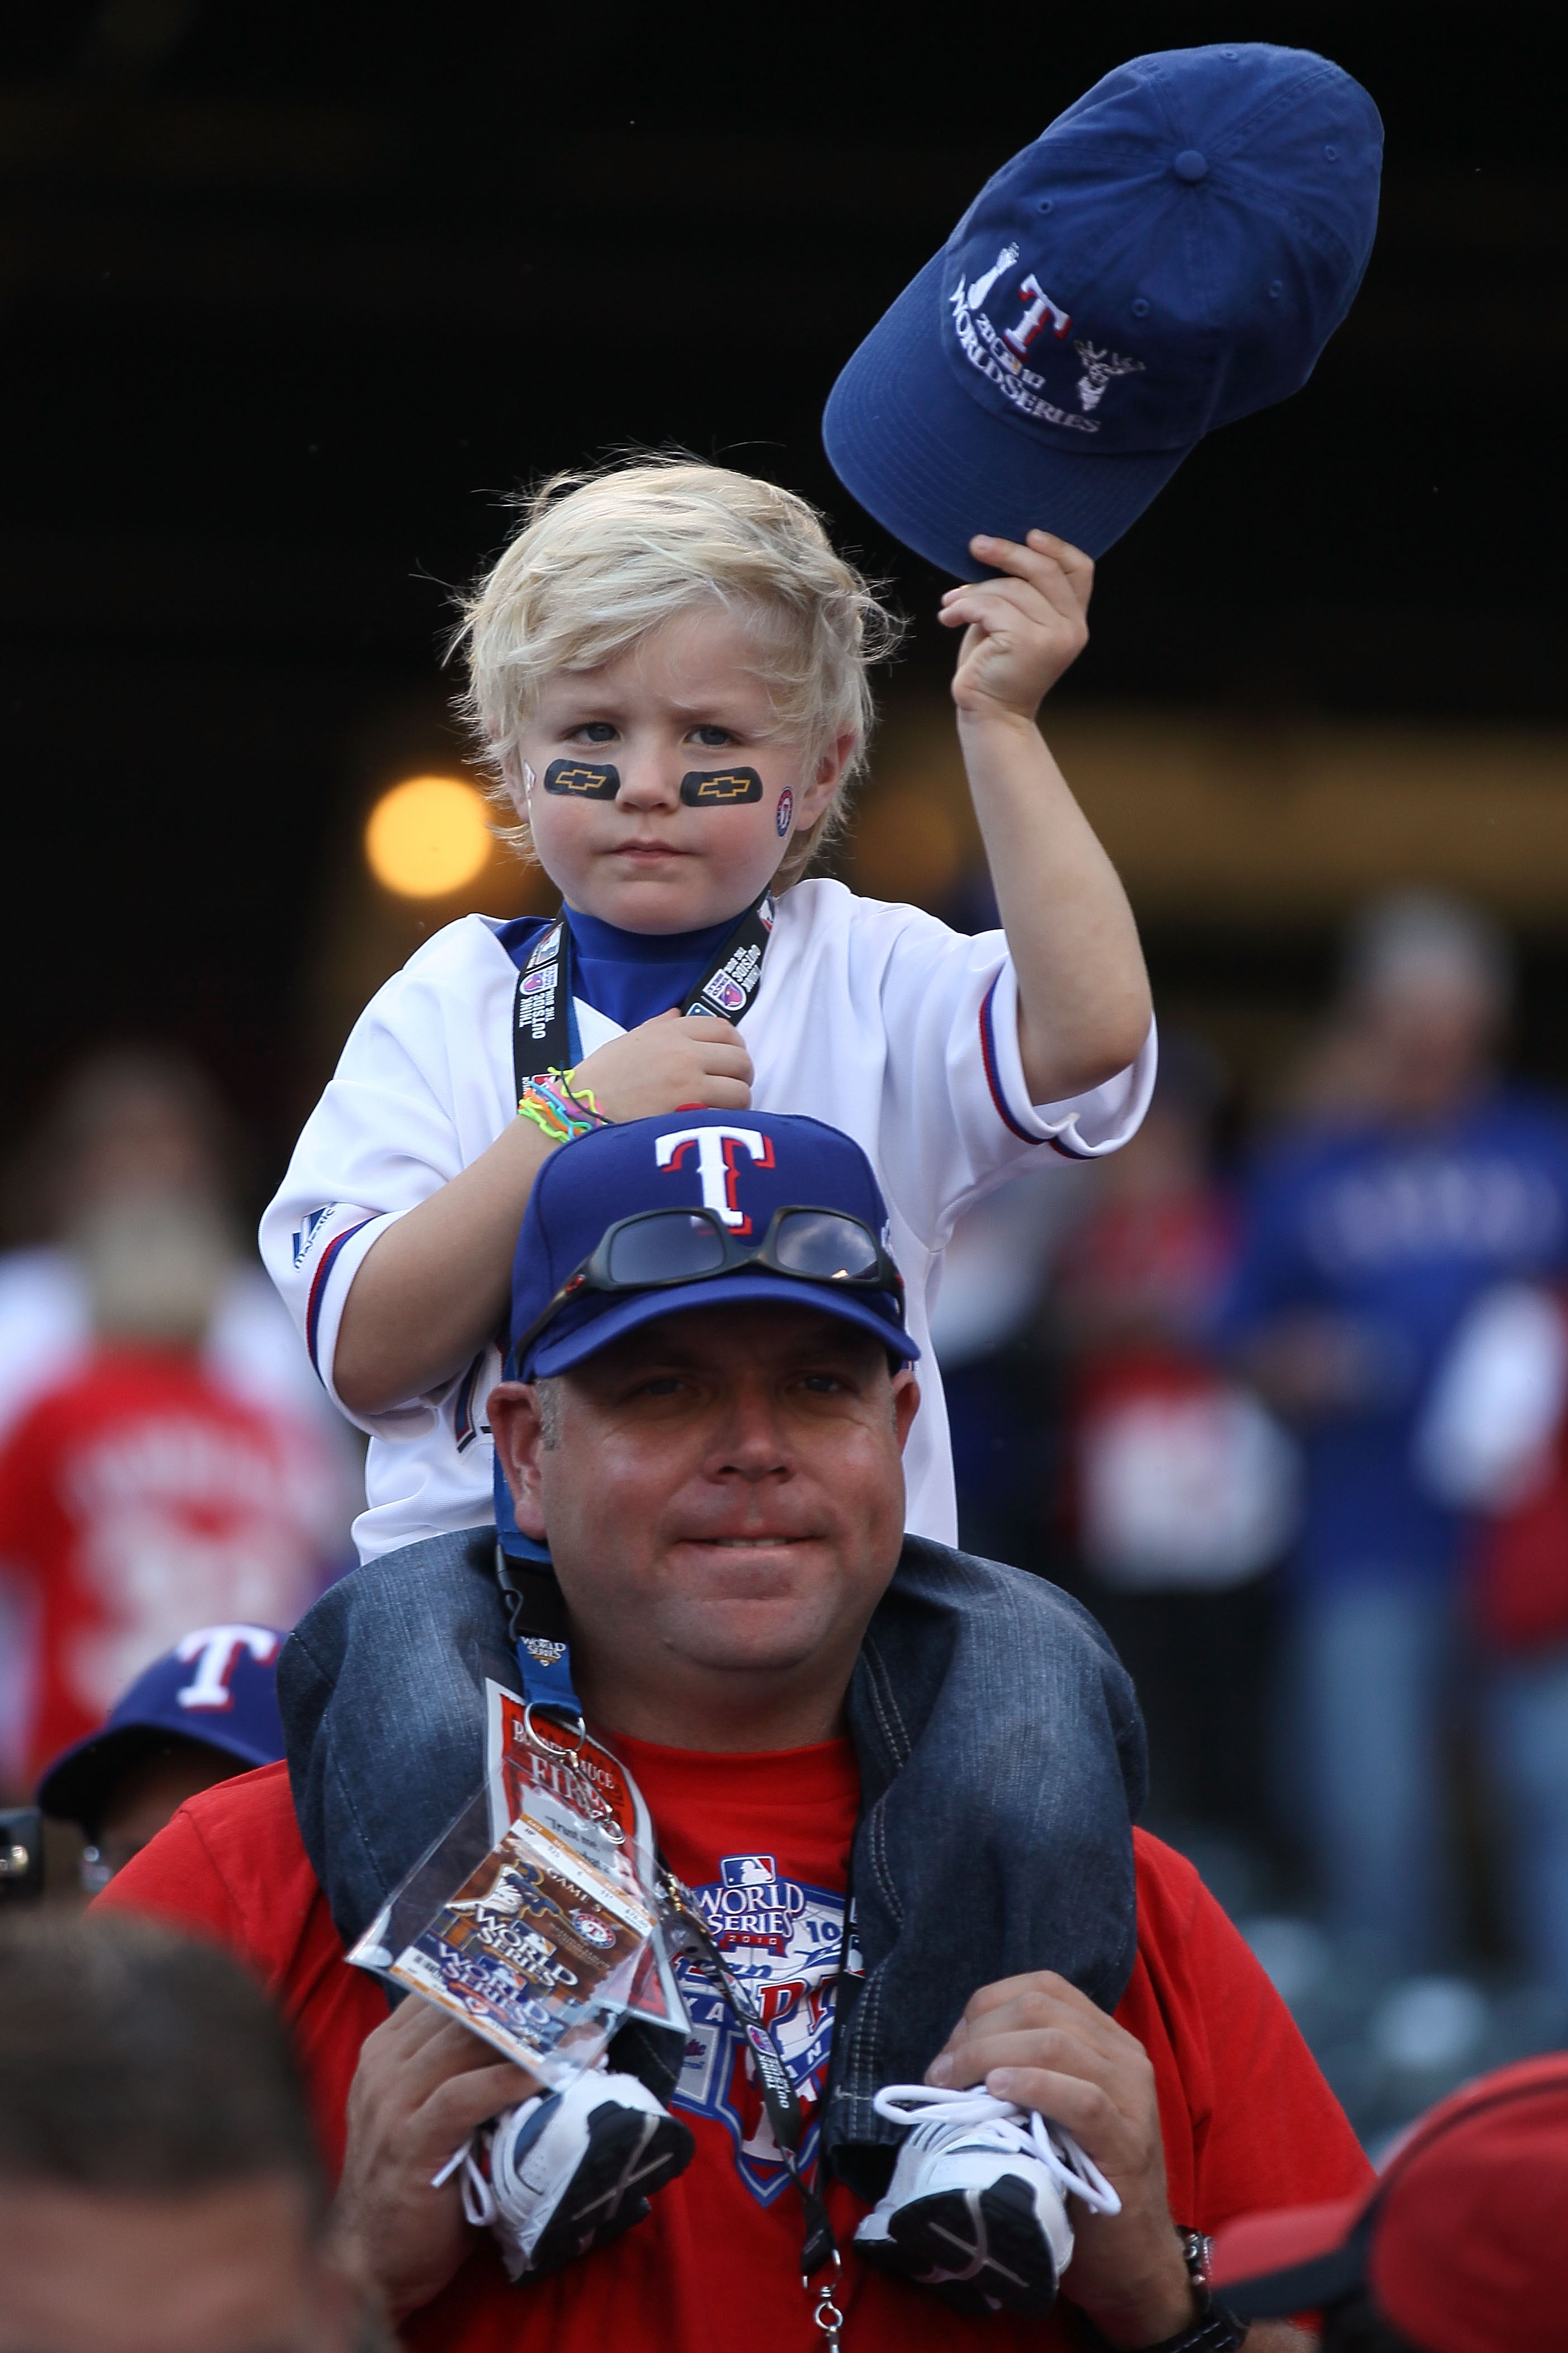 ARLINGTON, TX - NOVEMBER 01:  Fans of the Texas Rangers watch batting practice prior to the Rangers playing against the San Francisco Giants in Game Five of the 2010 MLB World Series at Rangers Ballpark in Arlington on November 1, 2010 in Arlington, Texas